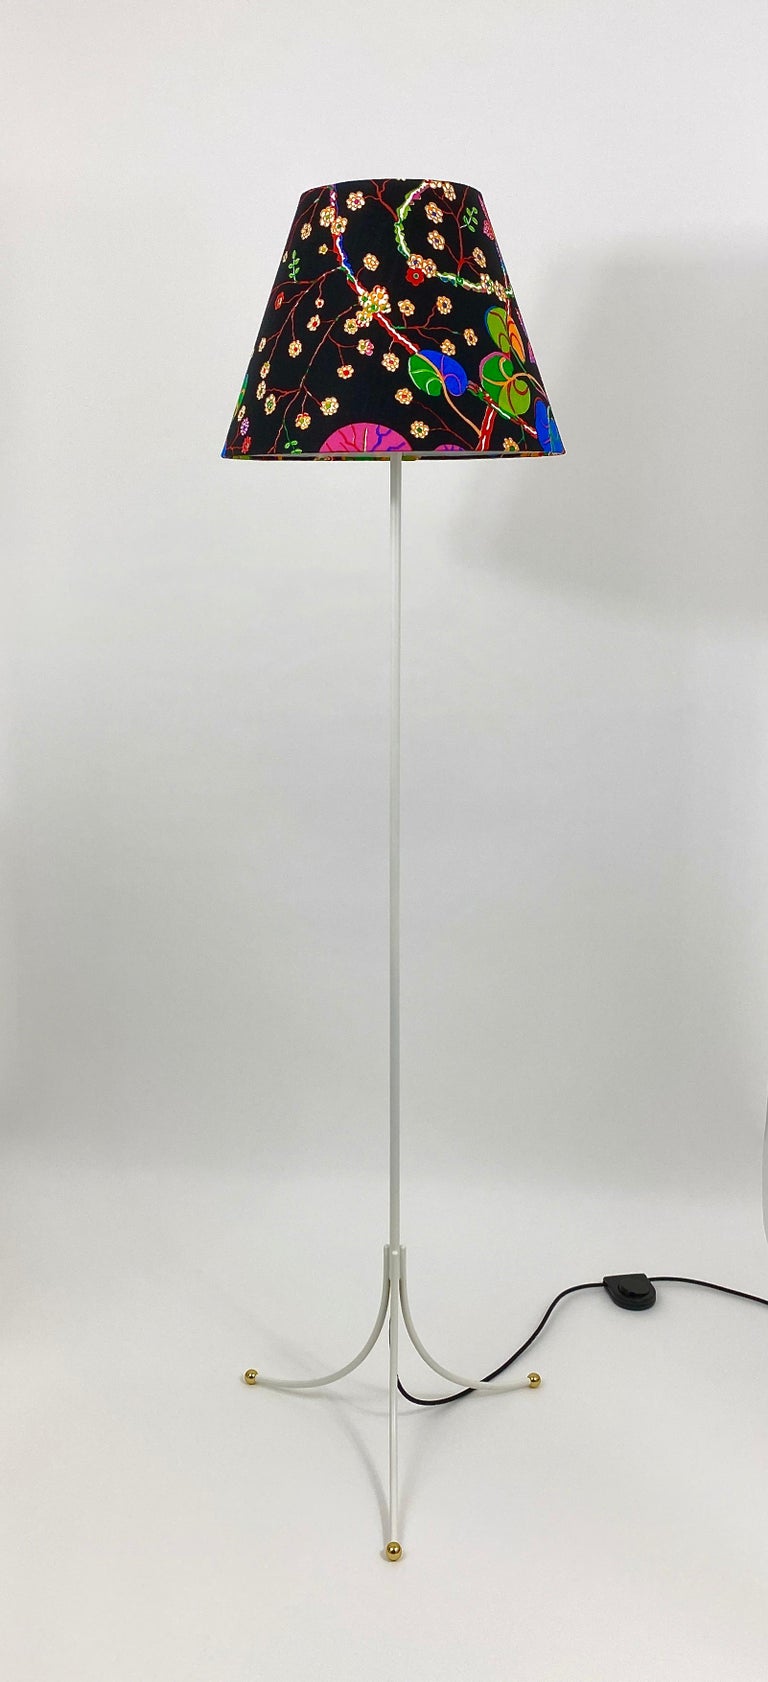 A beautiful Viennese midcentury tripod floor lamp from the 1950s, manufactured by 